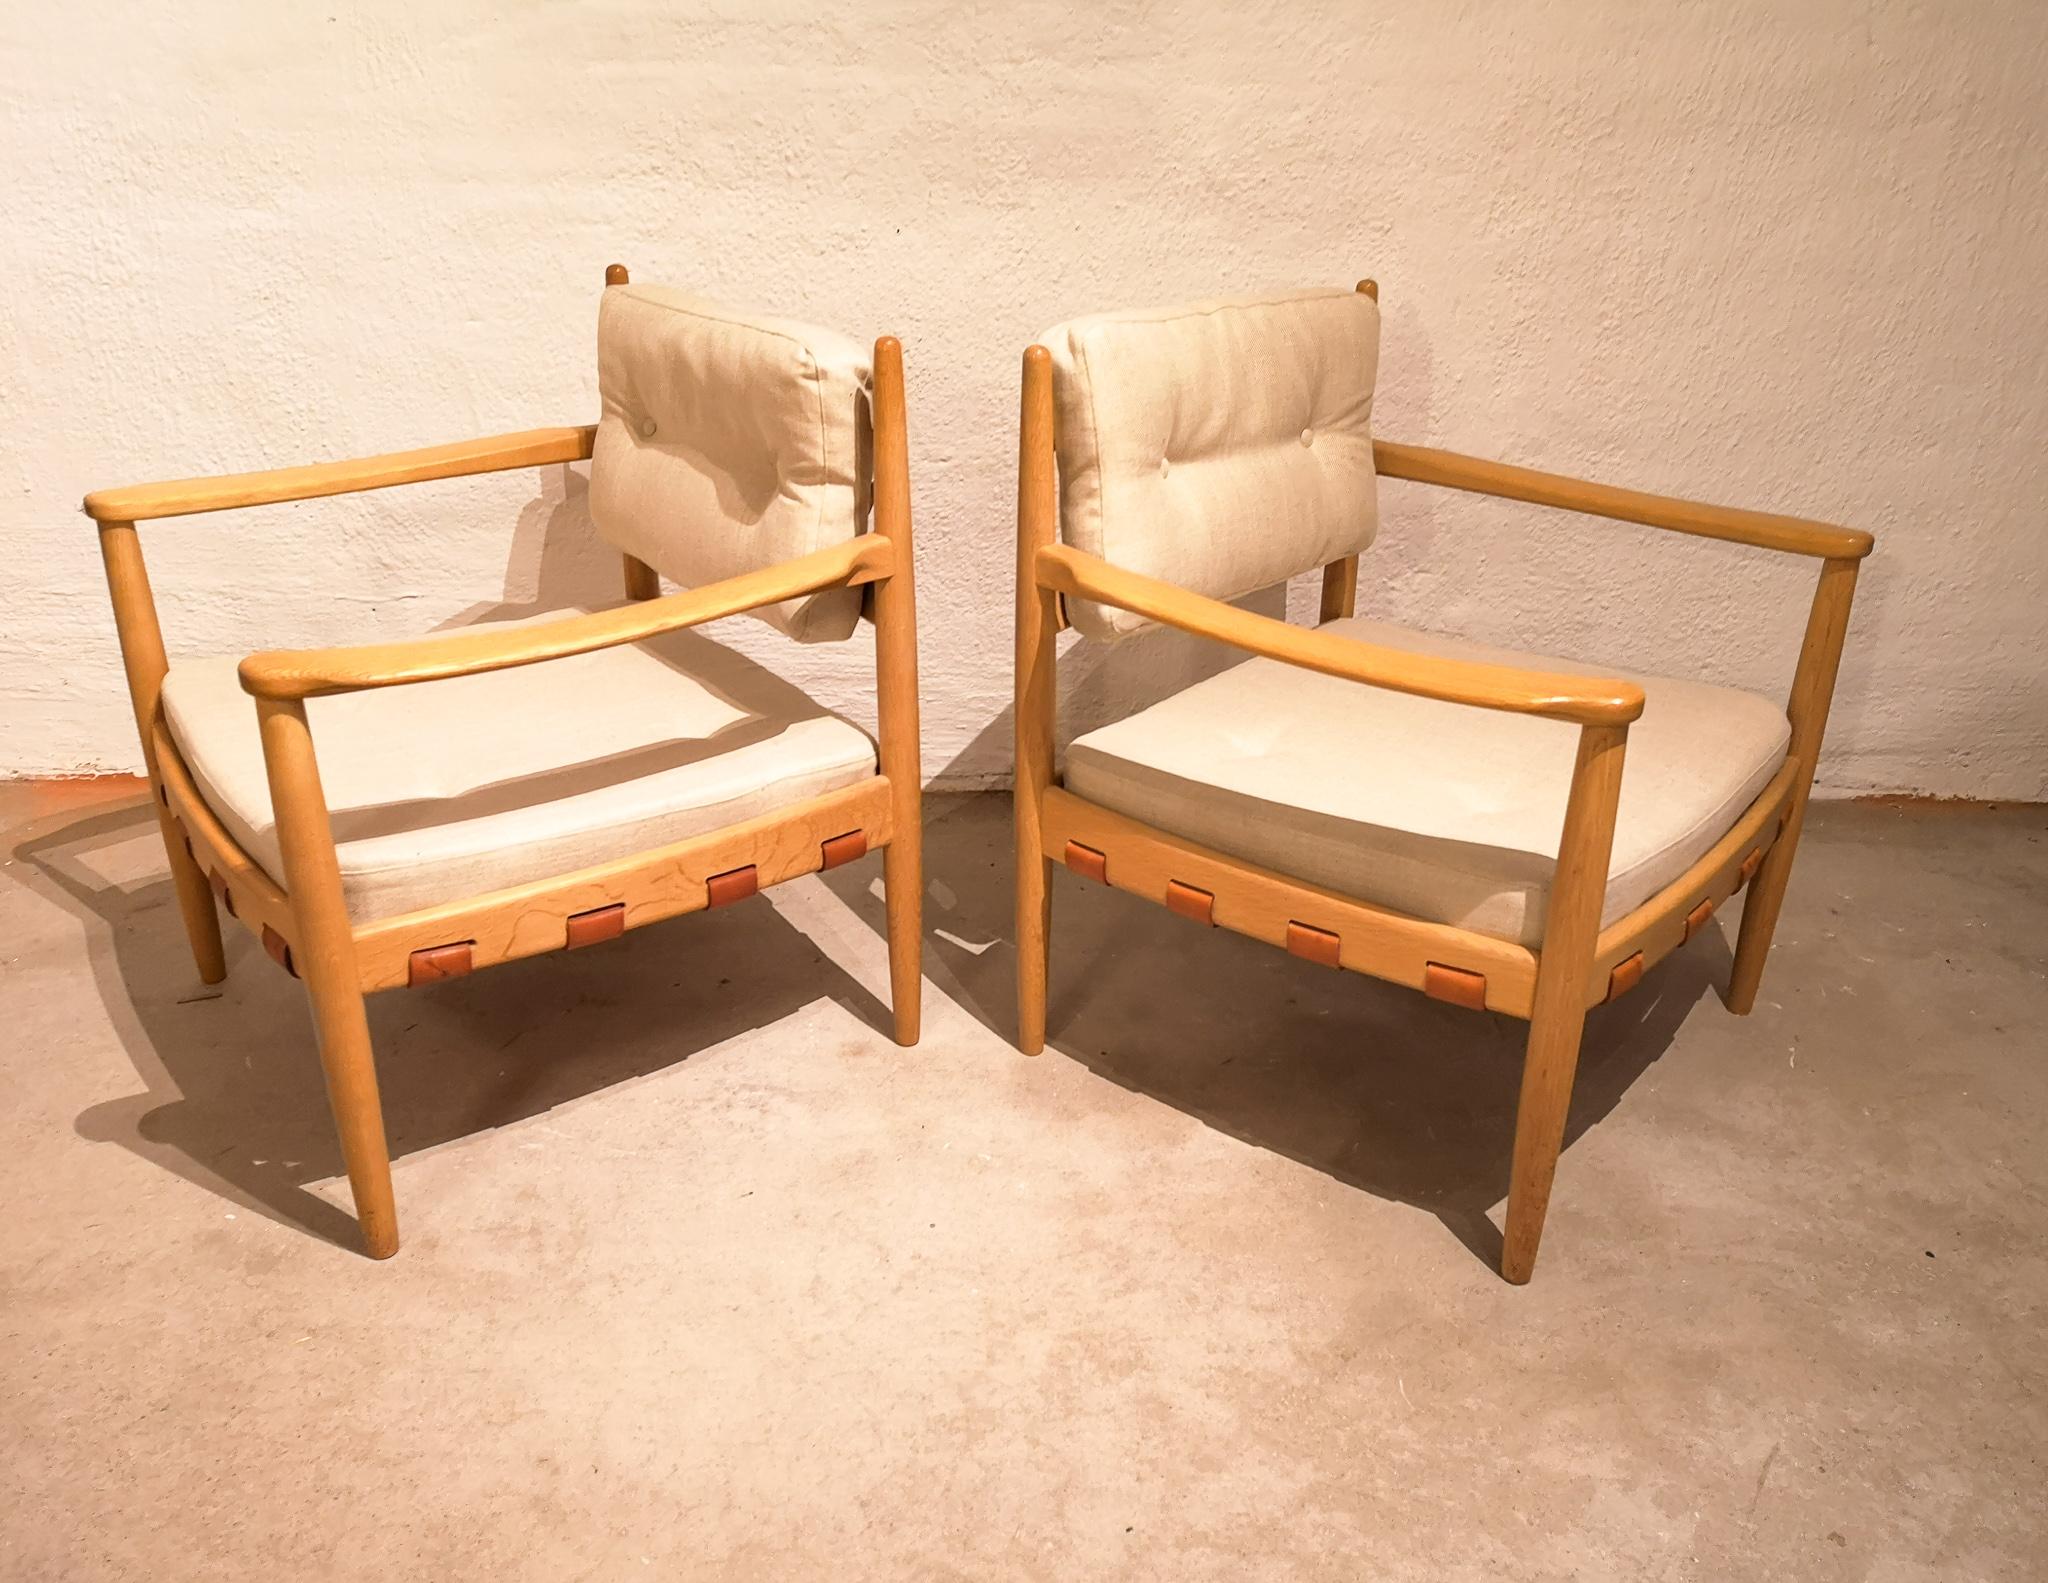 This pair of easy chairs model 